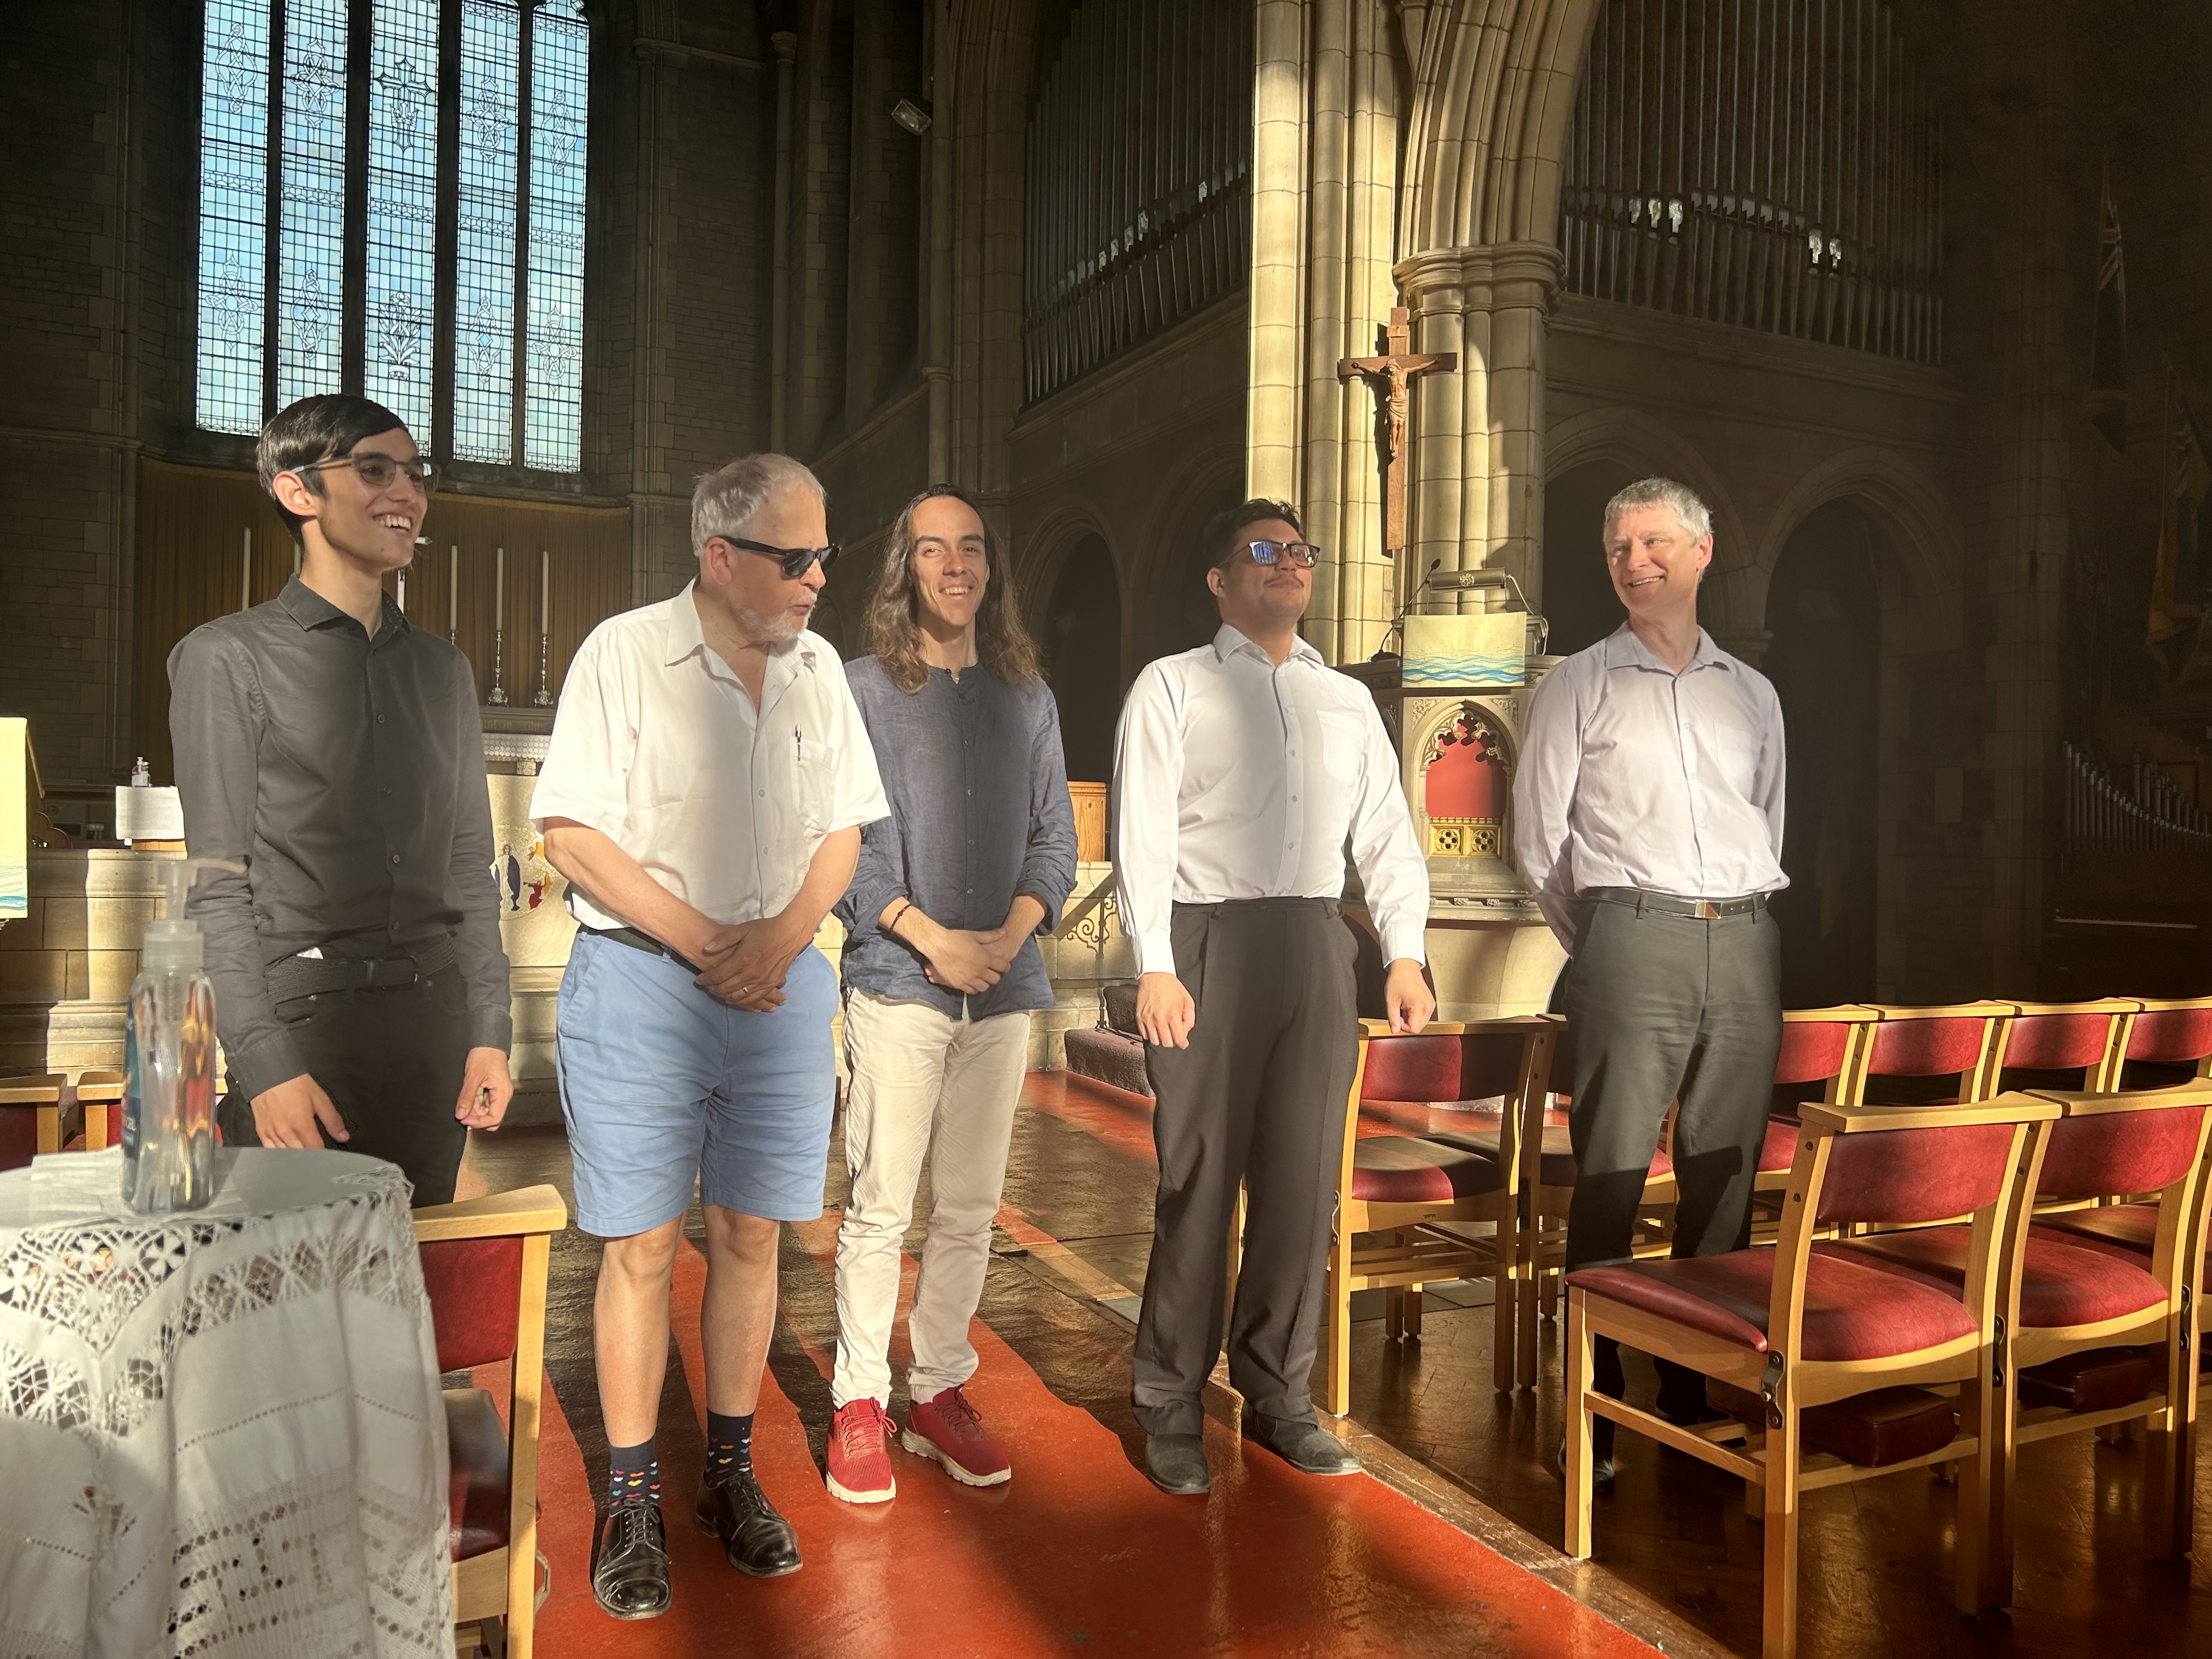 Image: recitalists at the end of the concert